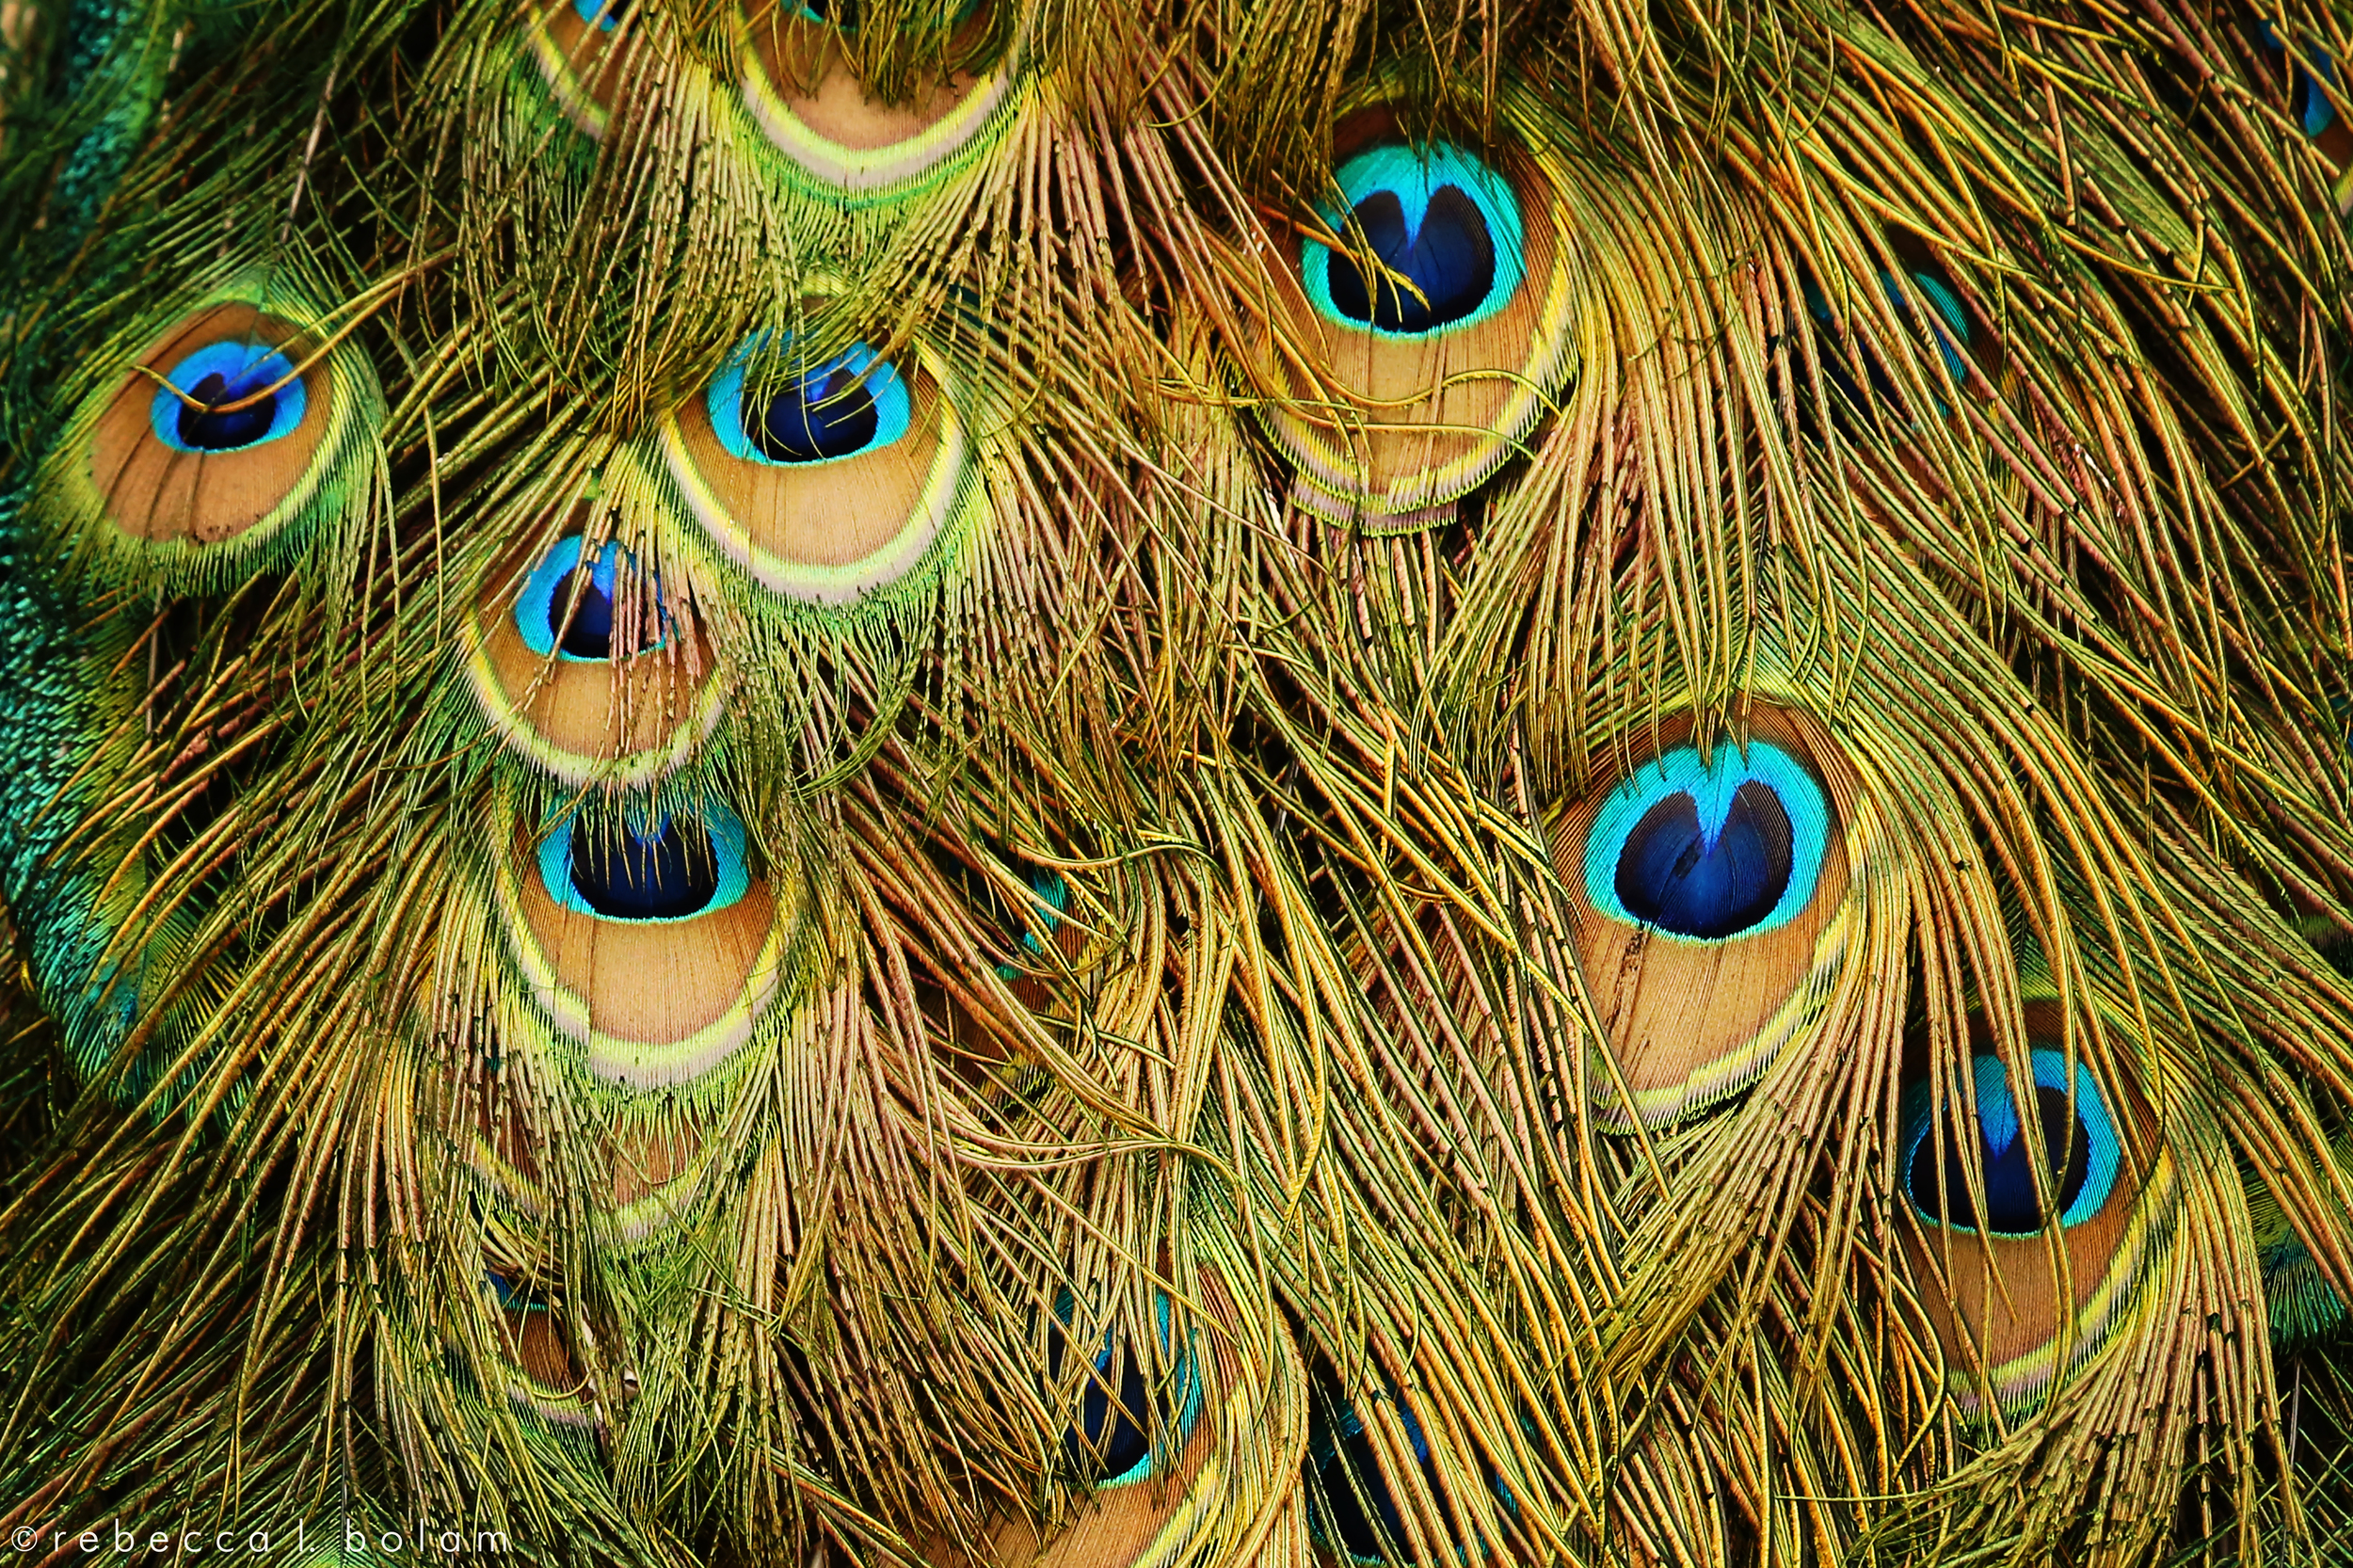 Peacock feathers close up.jpg